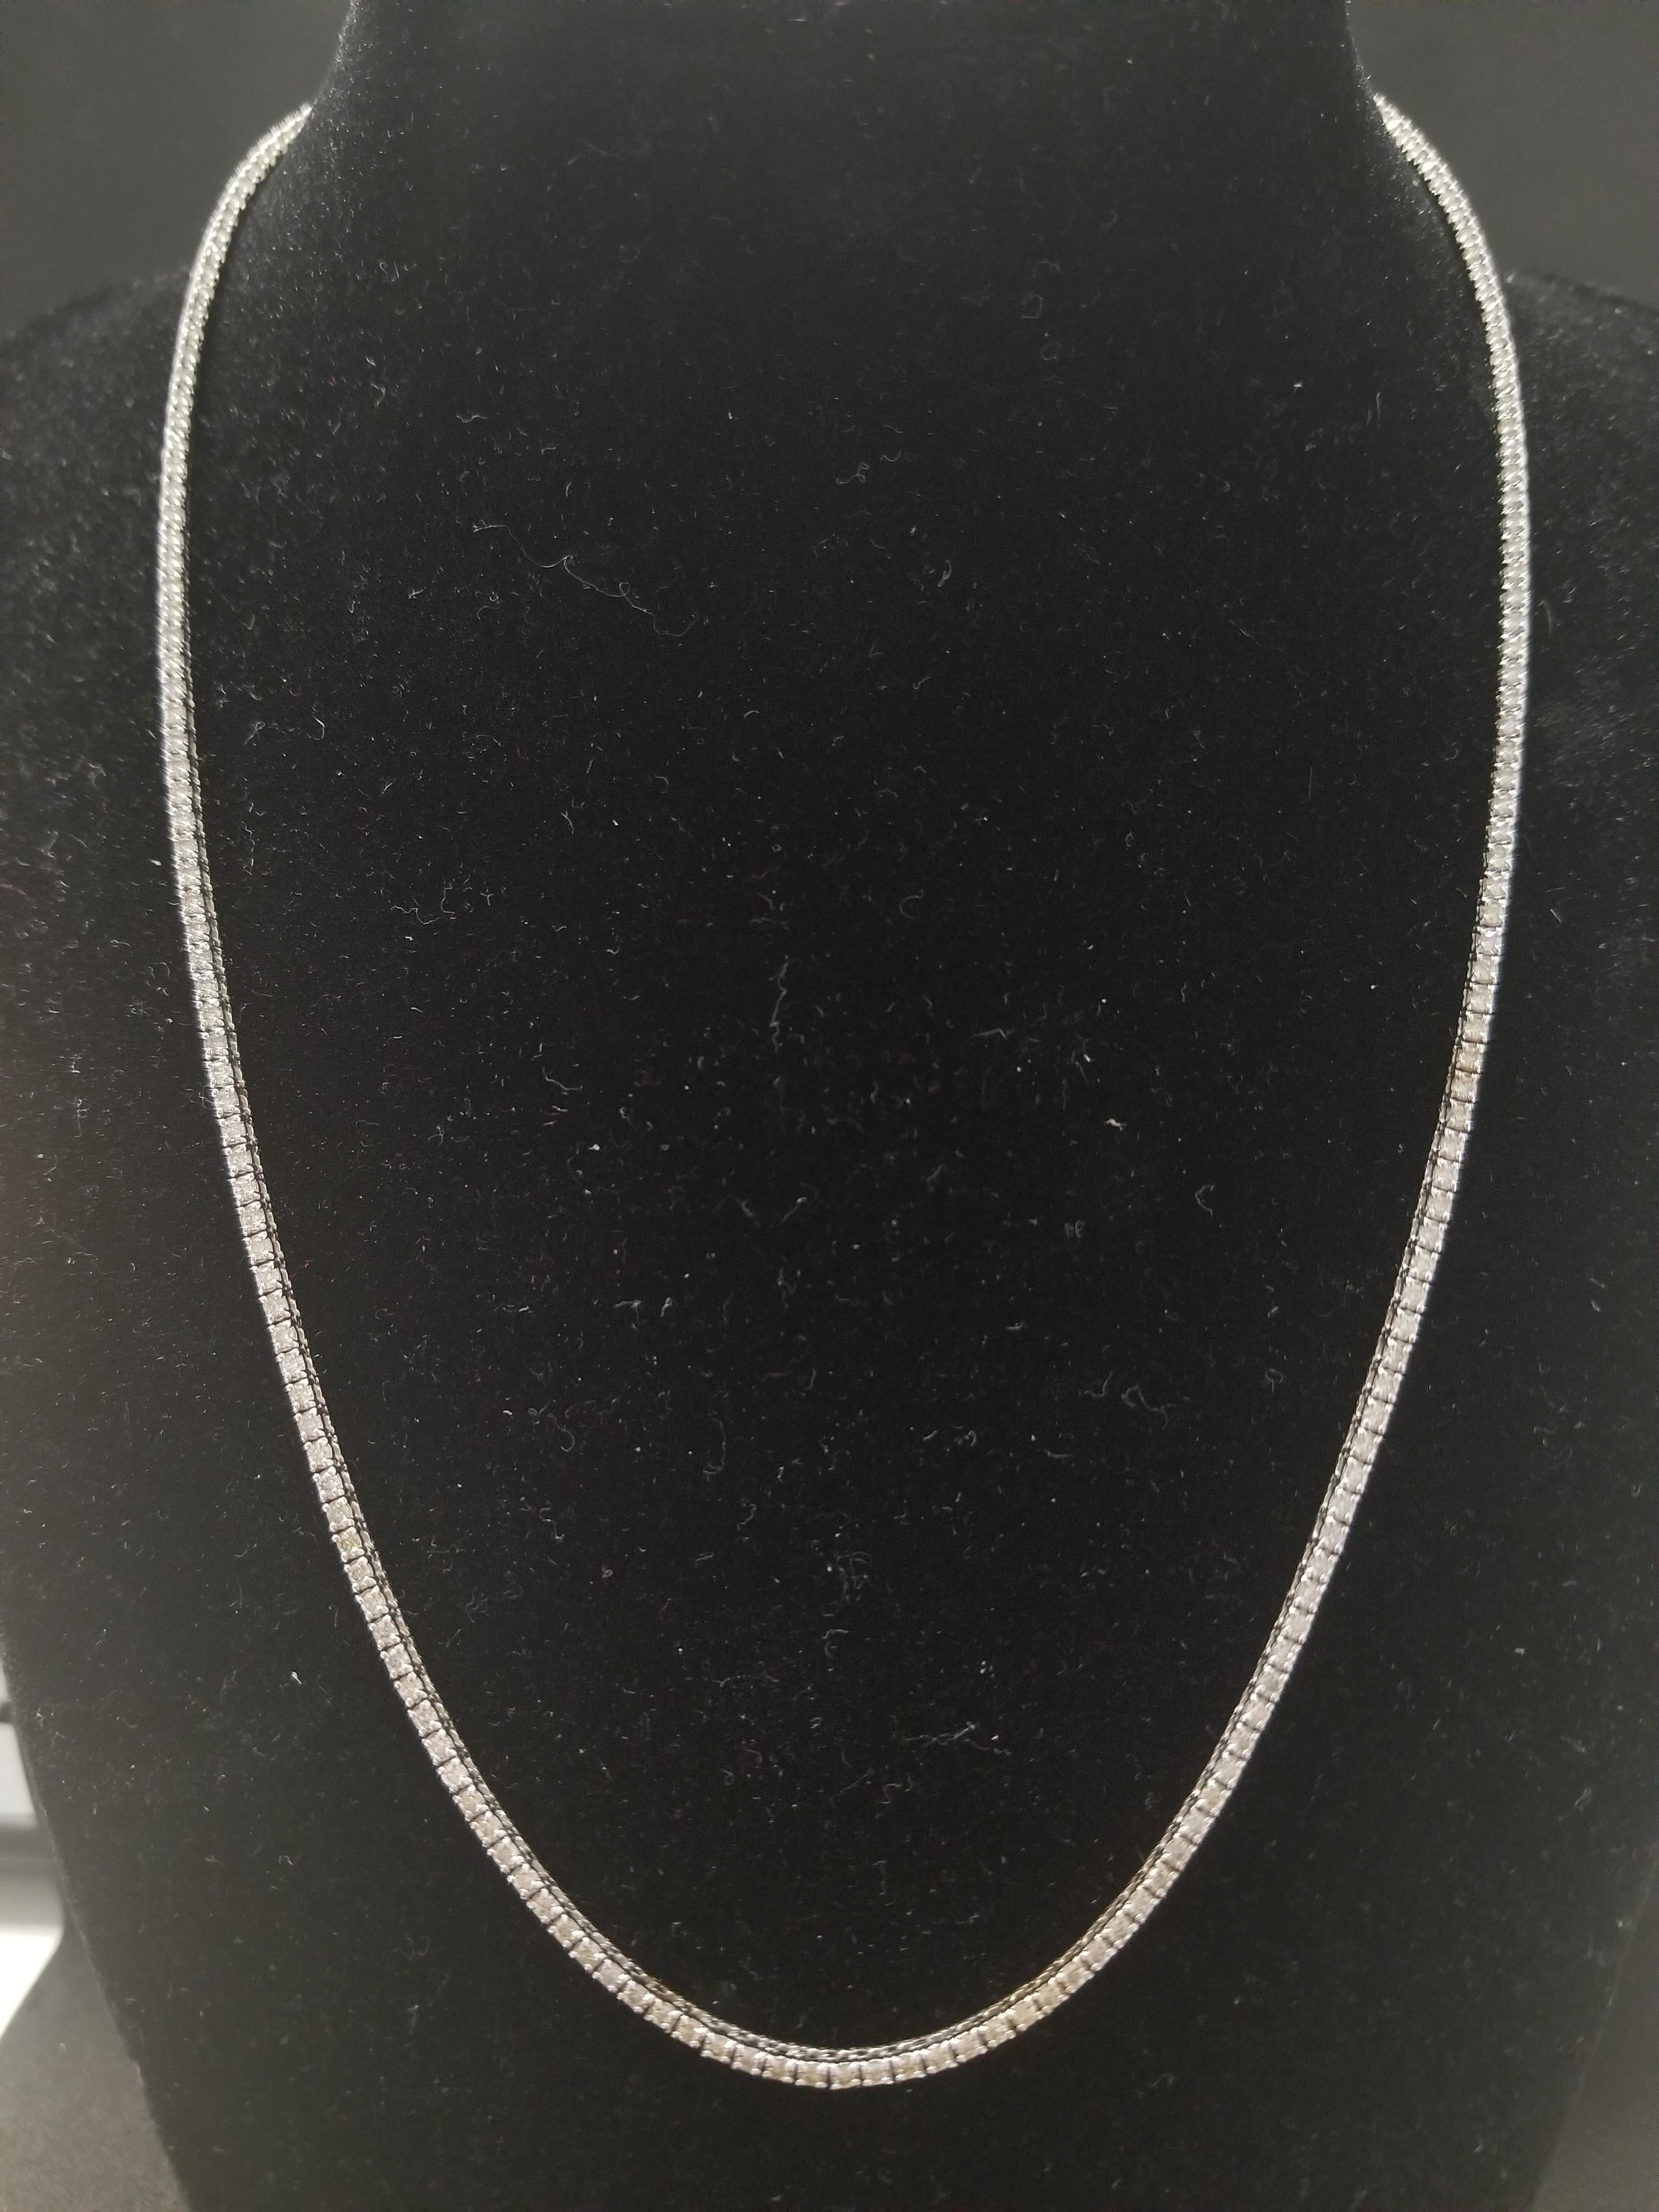 Stunning 14 Karat White Gold Round Brilliant Cut Diamond Tennis Necklace set on 4 prong setting. The total diamond weight is 4.10 carats. The closure is an insert clasp with safety clasp. Length is 18 inches.